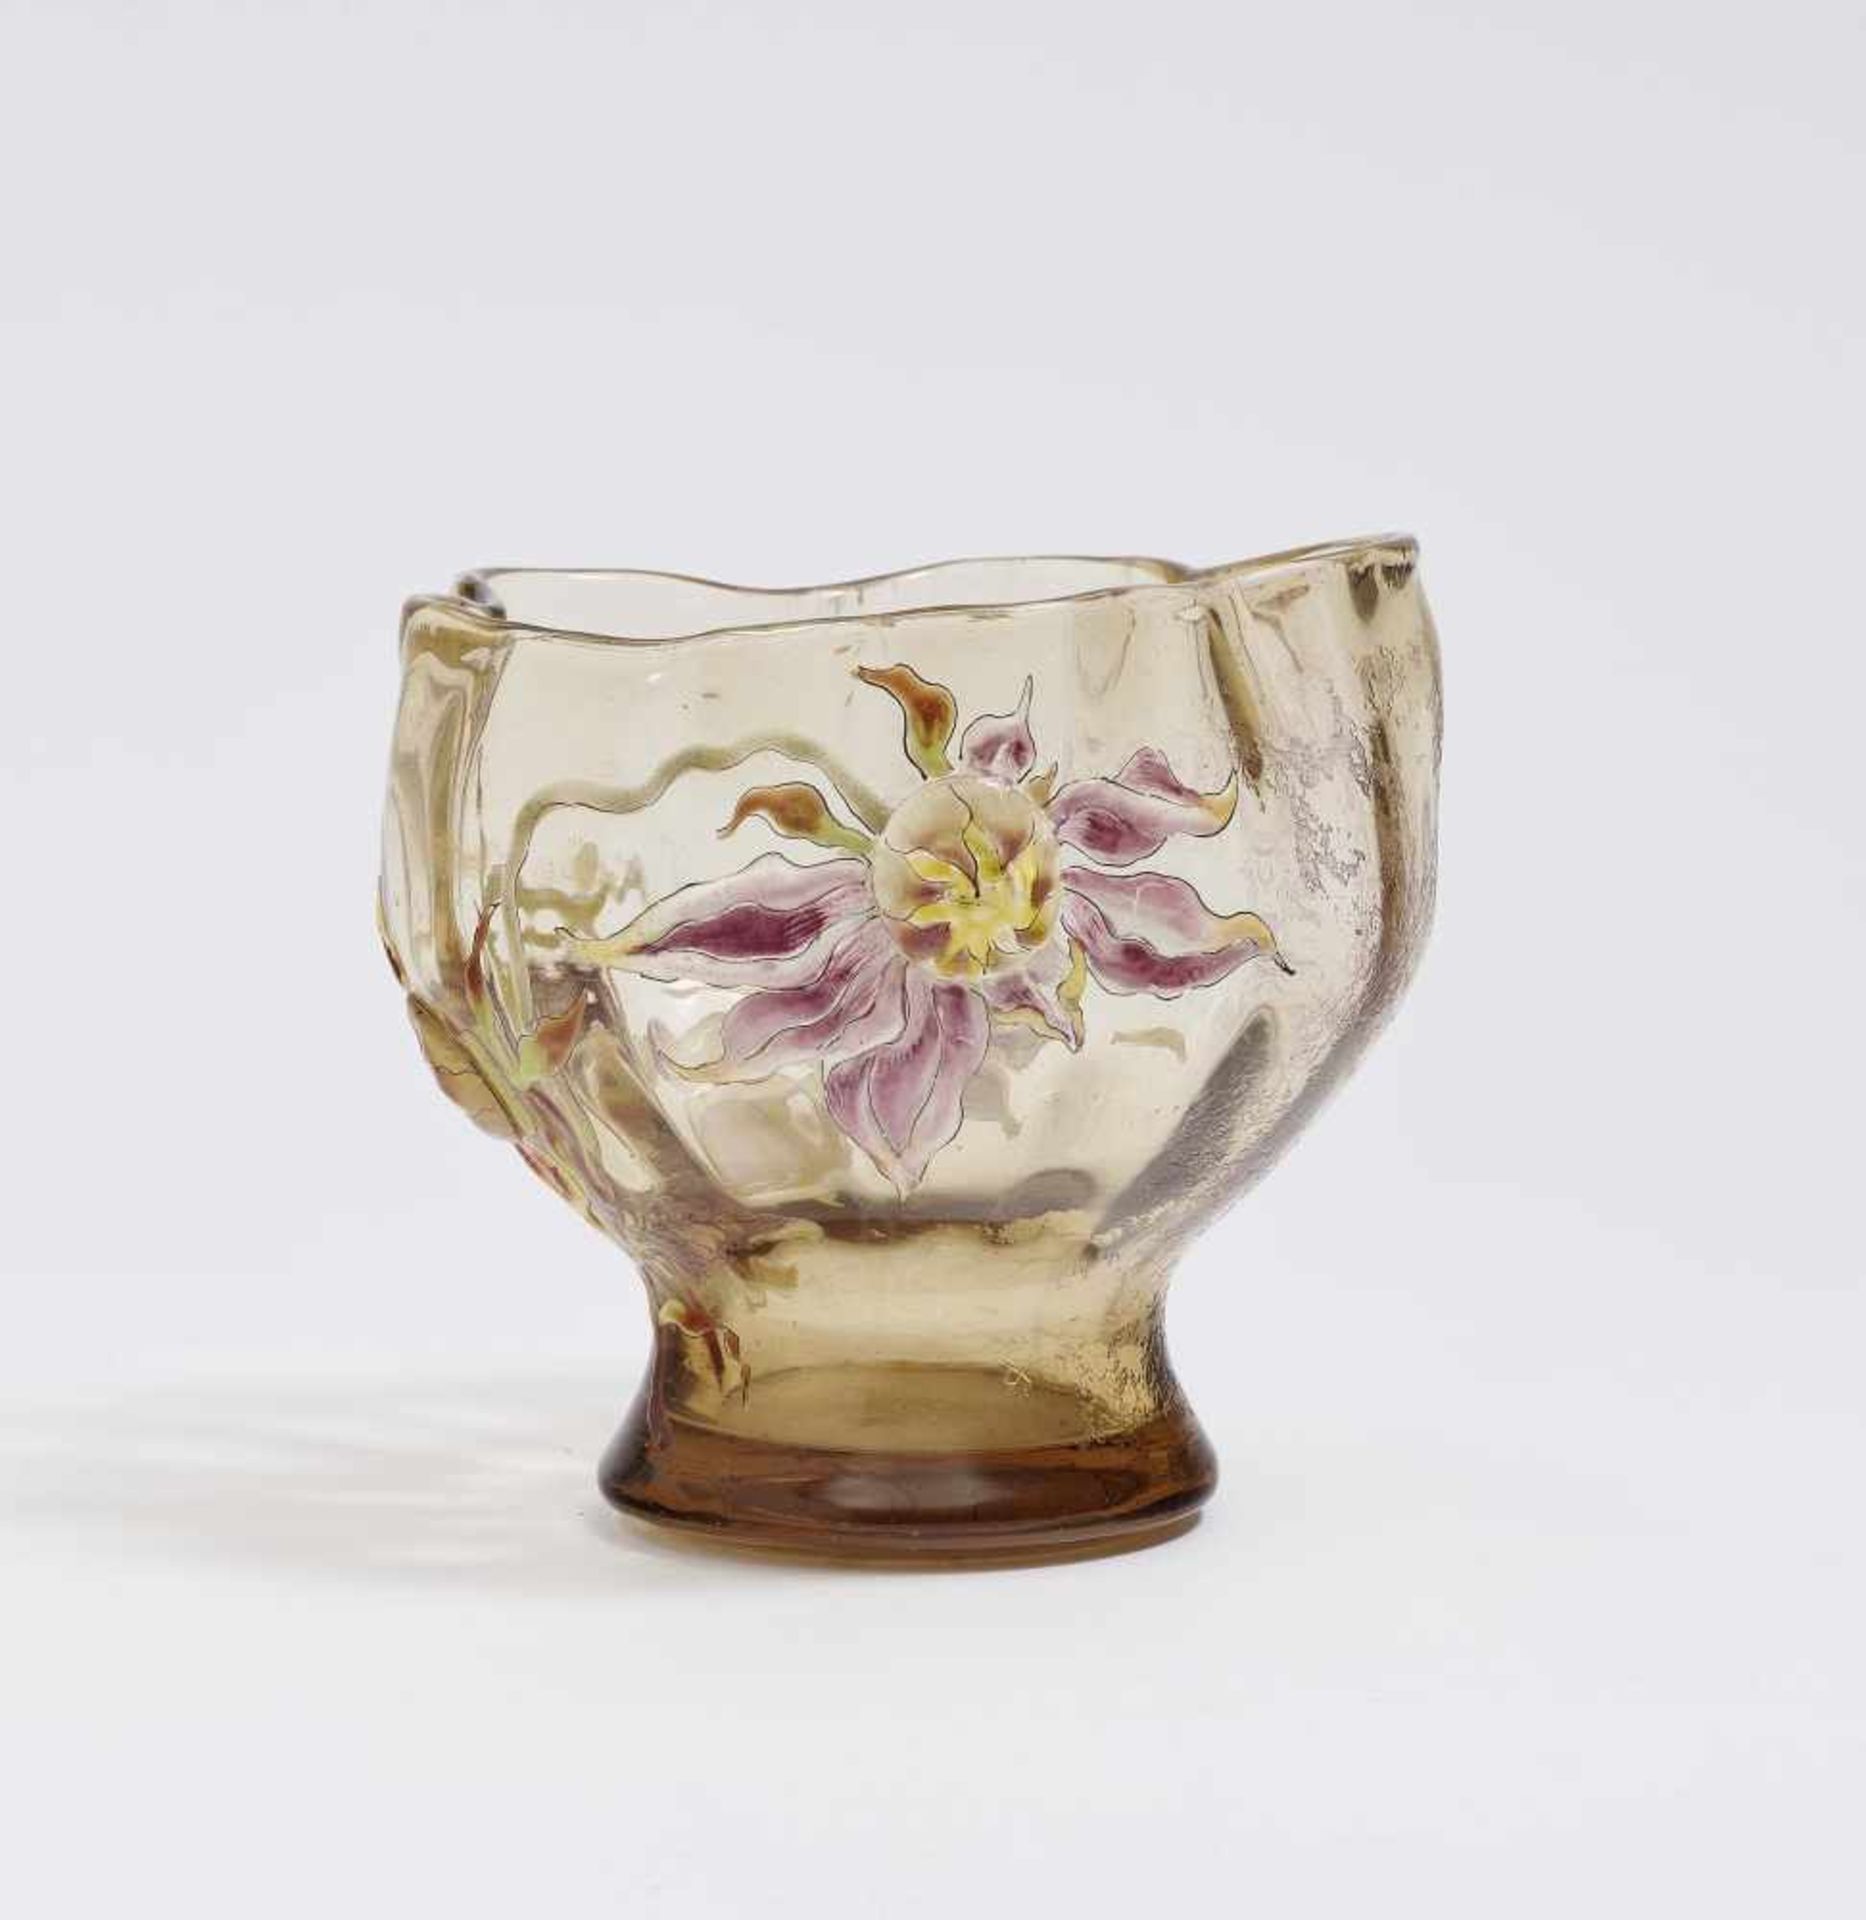 A footed bowlEmile Gallé, Nancy, circa 1894 Glass. Gold-coloured needle etching. Colourful enamel